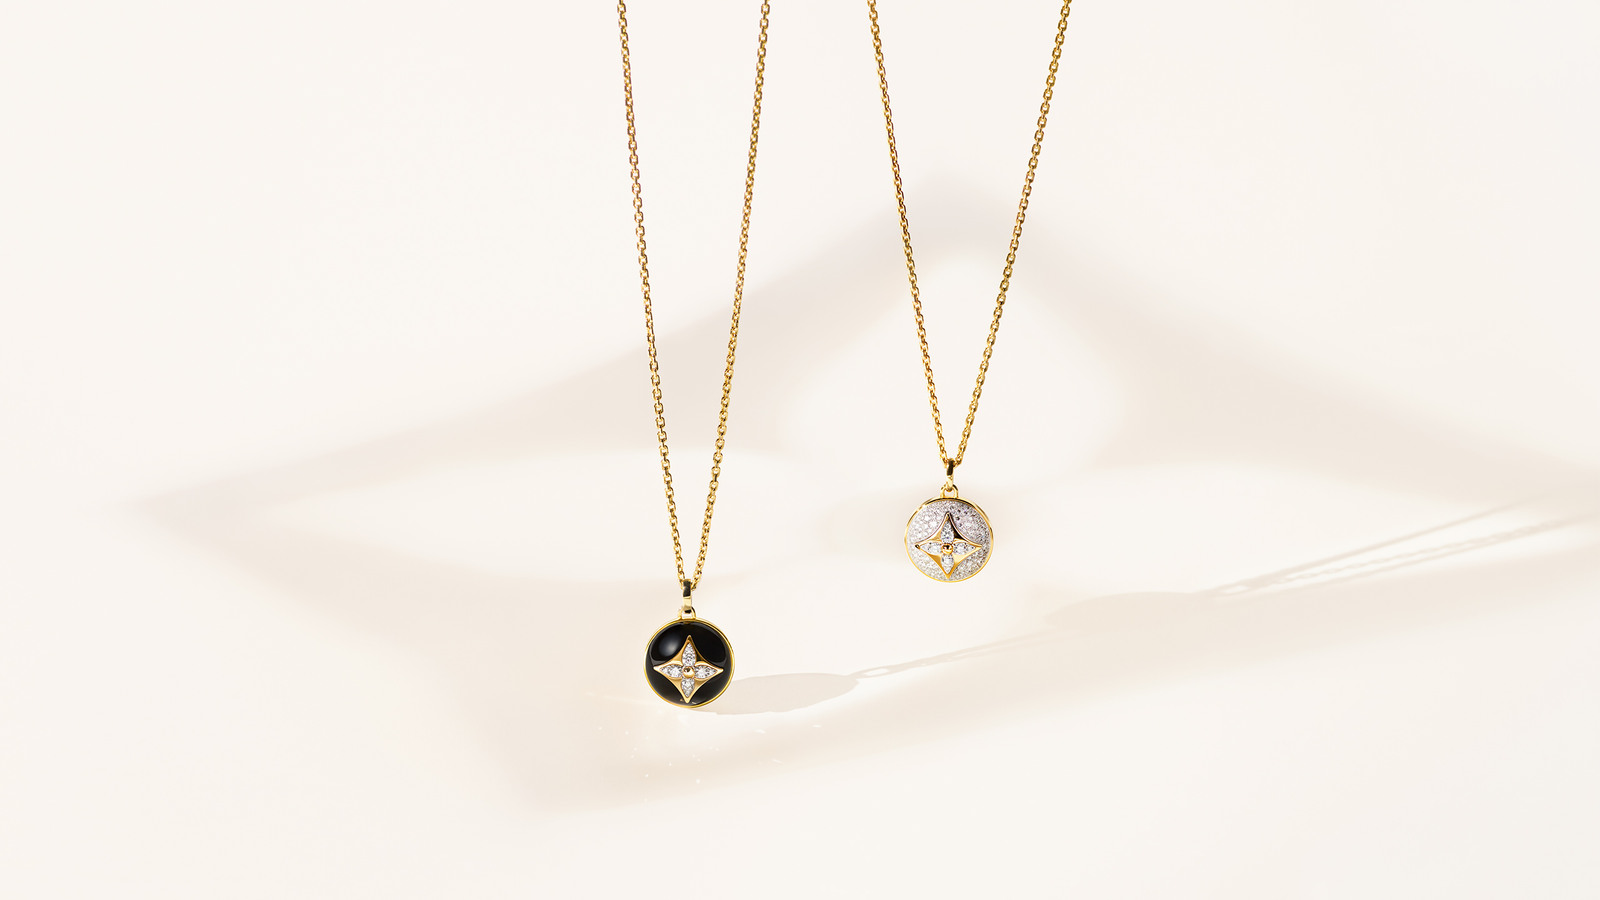 Louis Vuitton lance sa collection joaillerie B-Blossom - Marie Claire